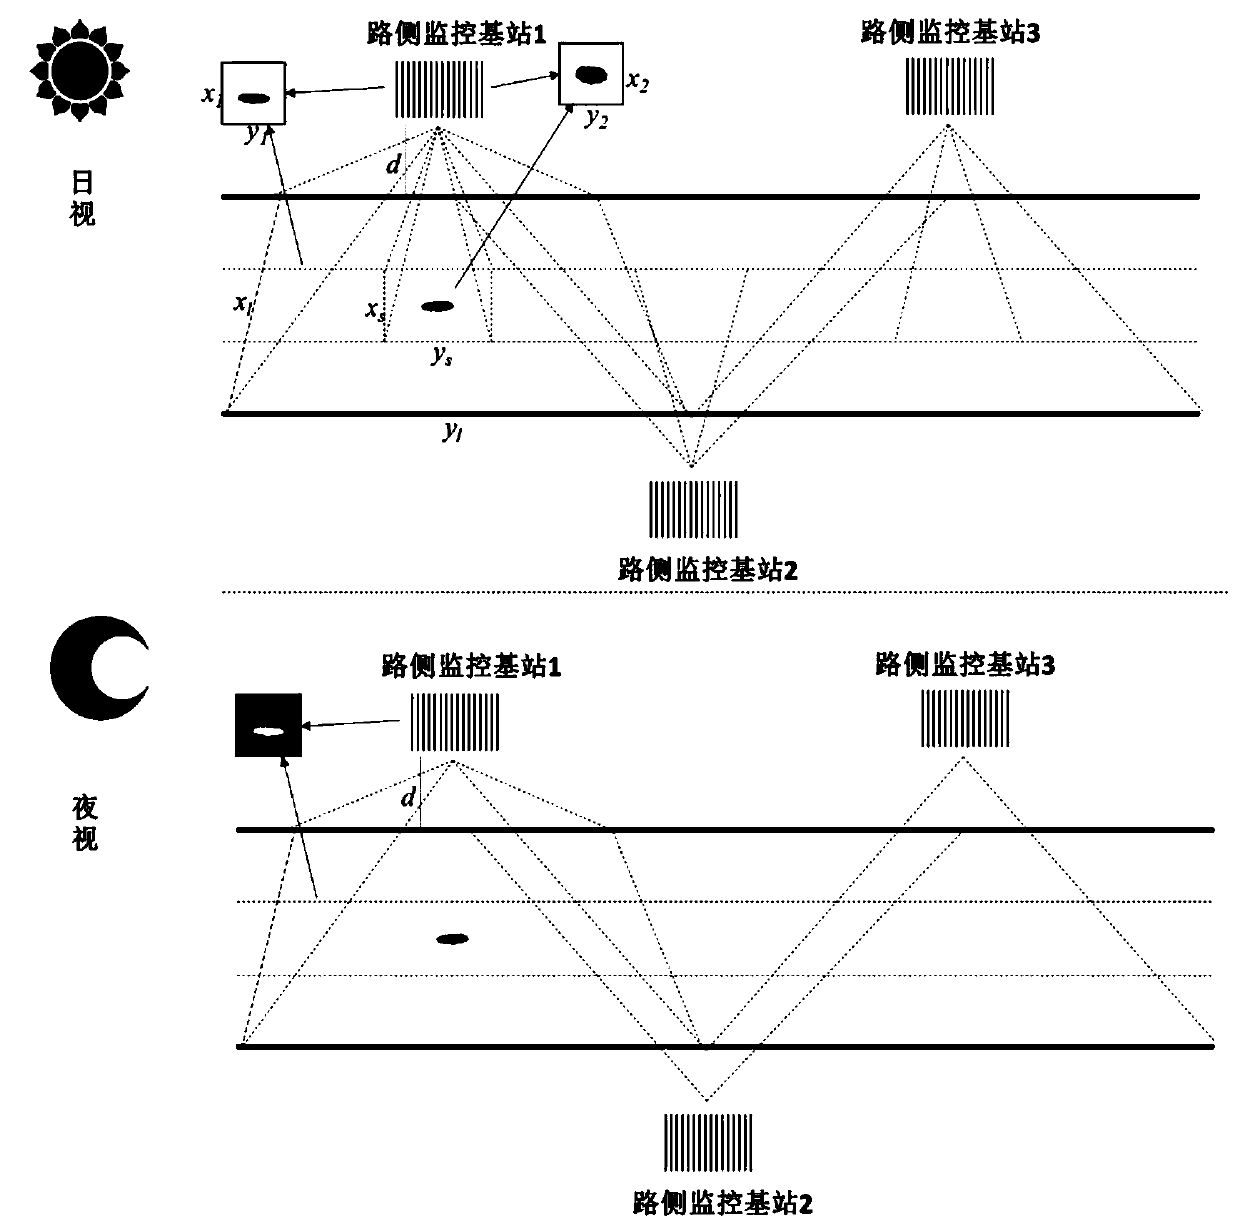 Highway pavement condition detection system based on novel visual sensing equipment